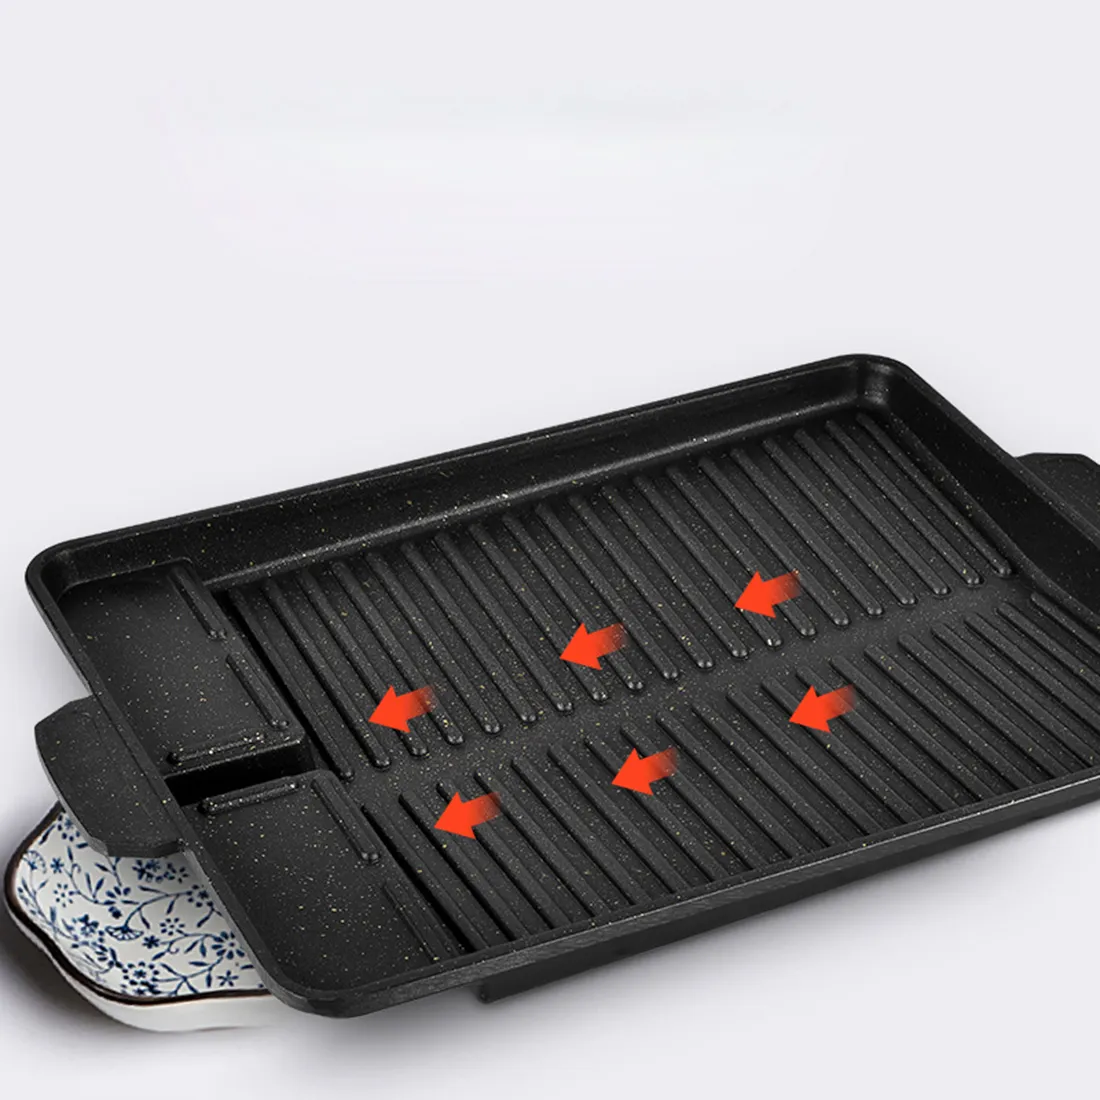 Hot 32 X 26cm Stone Barbecue Frying Grill Pan Rectangle Non-Stick Grill Cookware Korean BBQ Tray Barbecue Plate - Black T200506